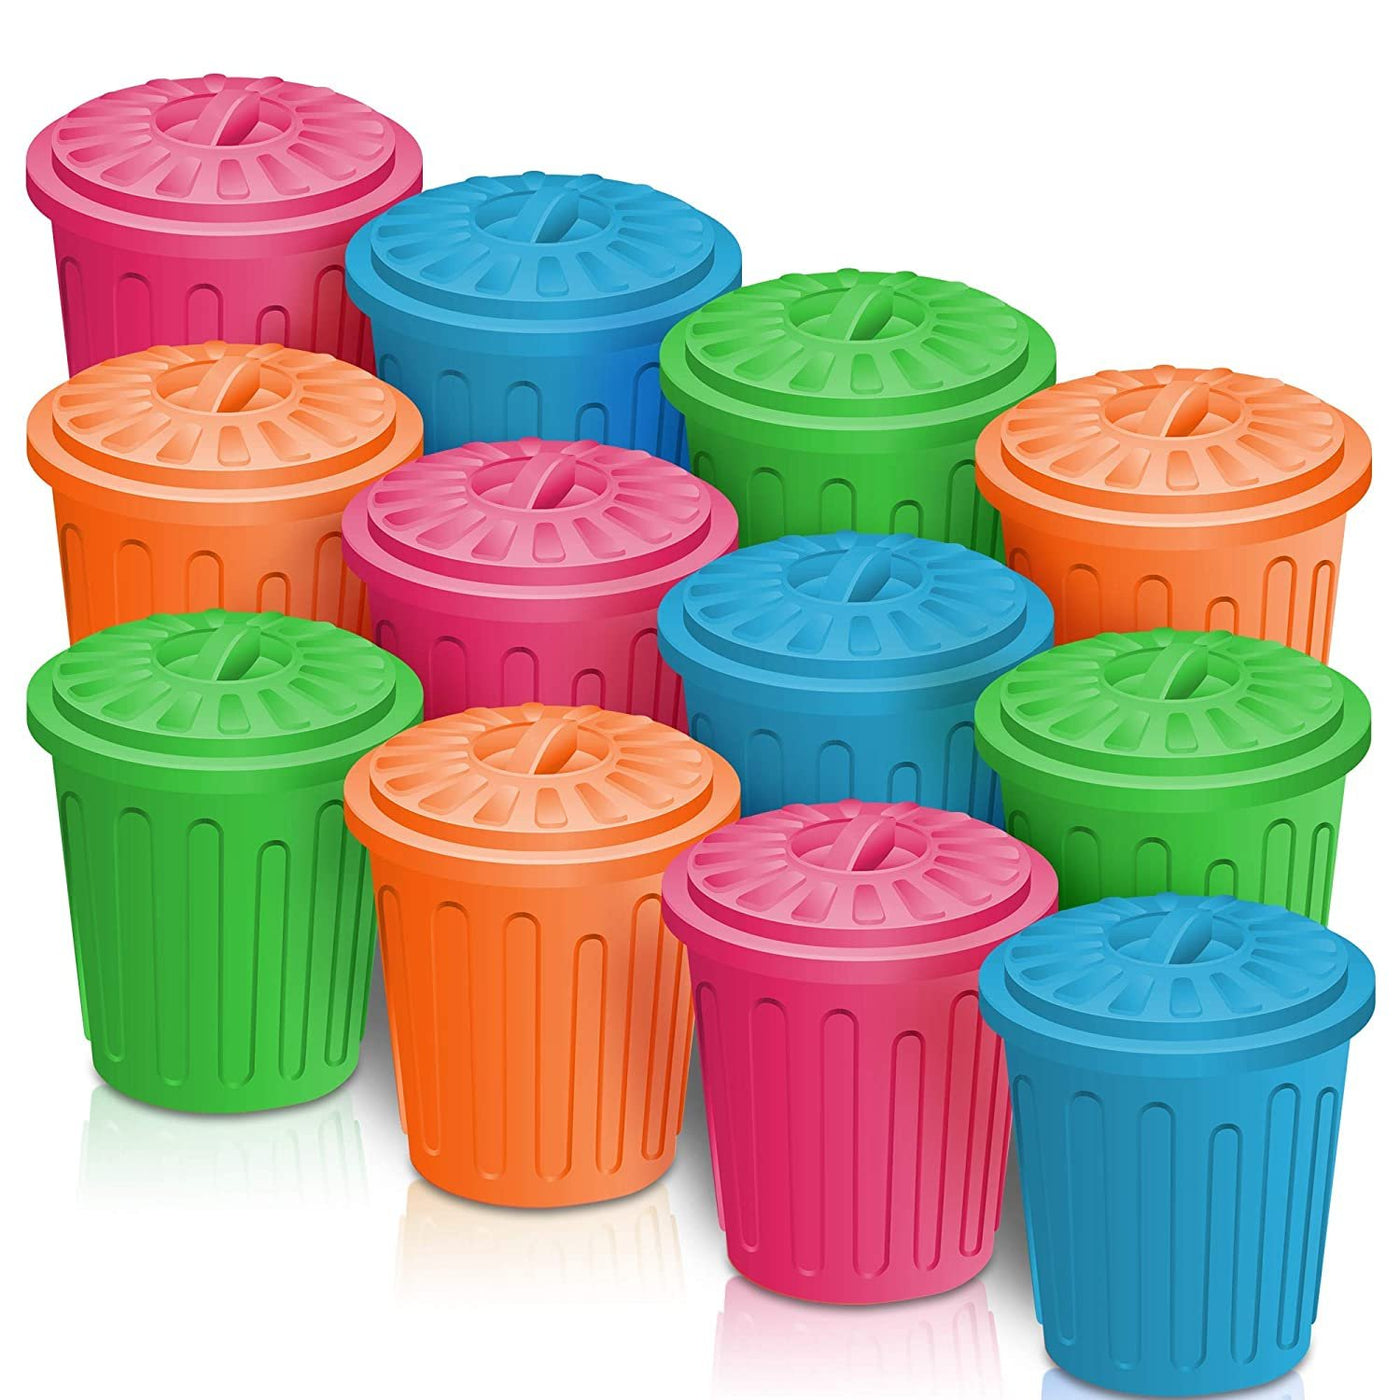 12-Pack Colorful Small Storage Baskets Plastic Bins for Organizing